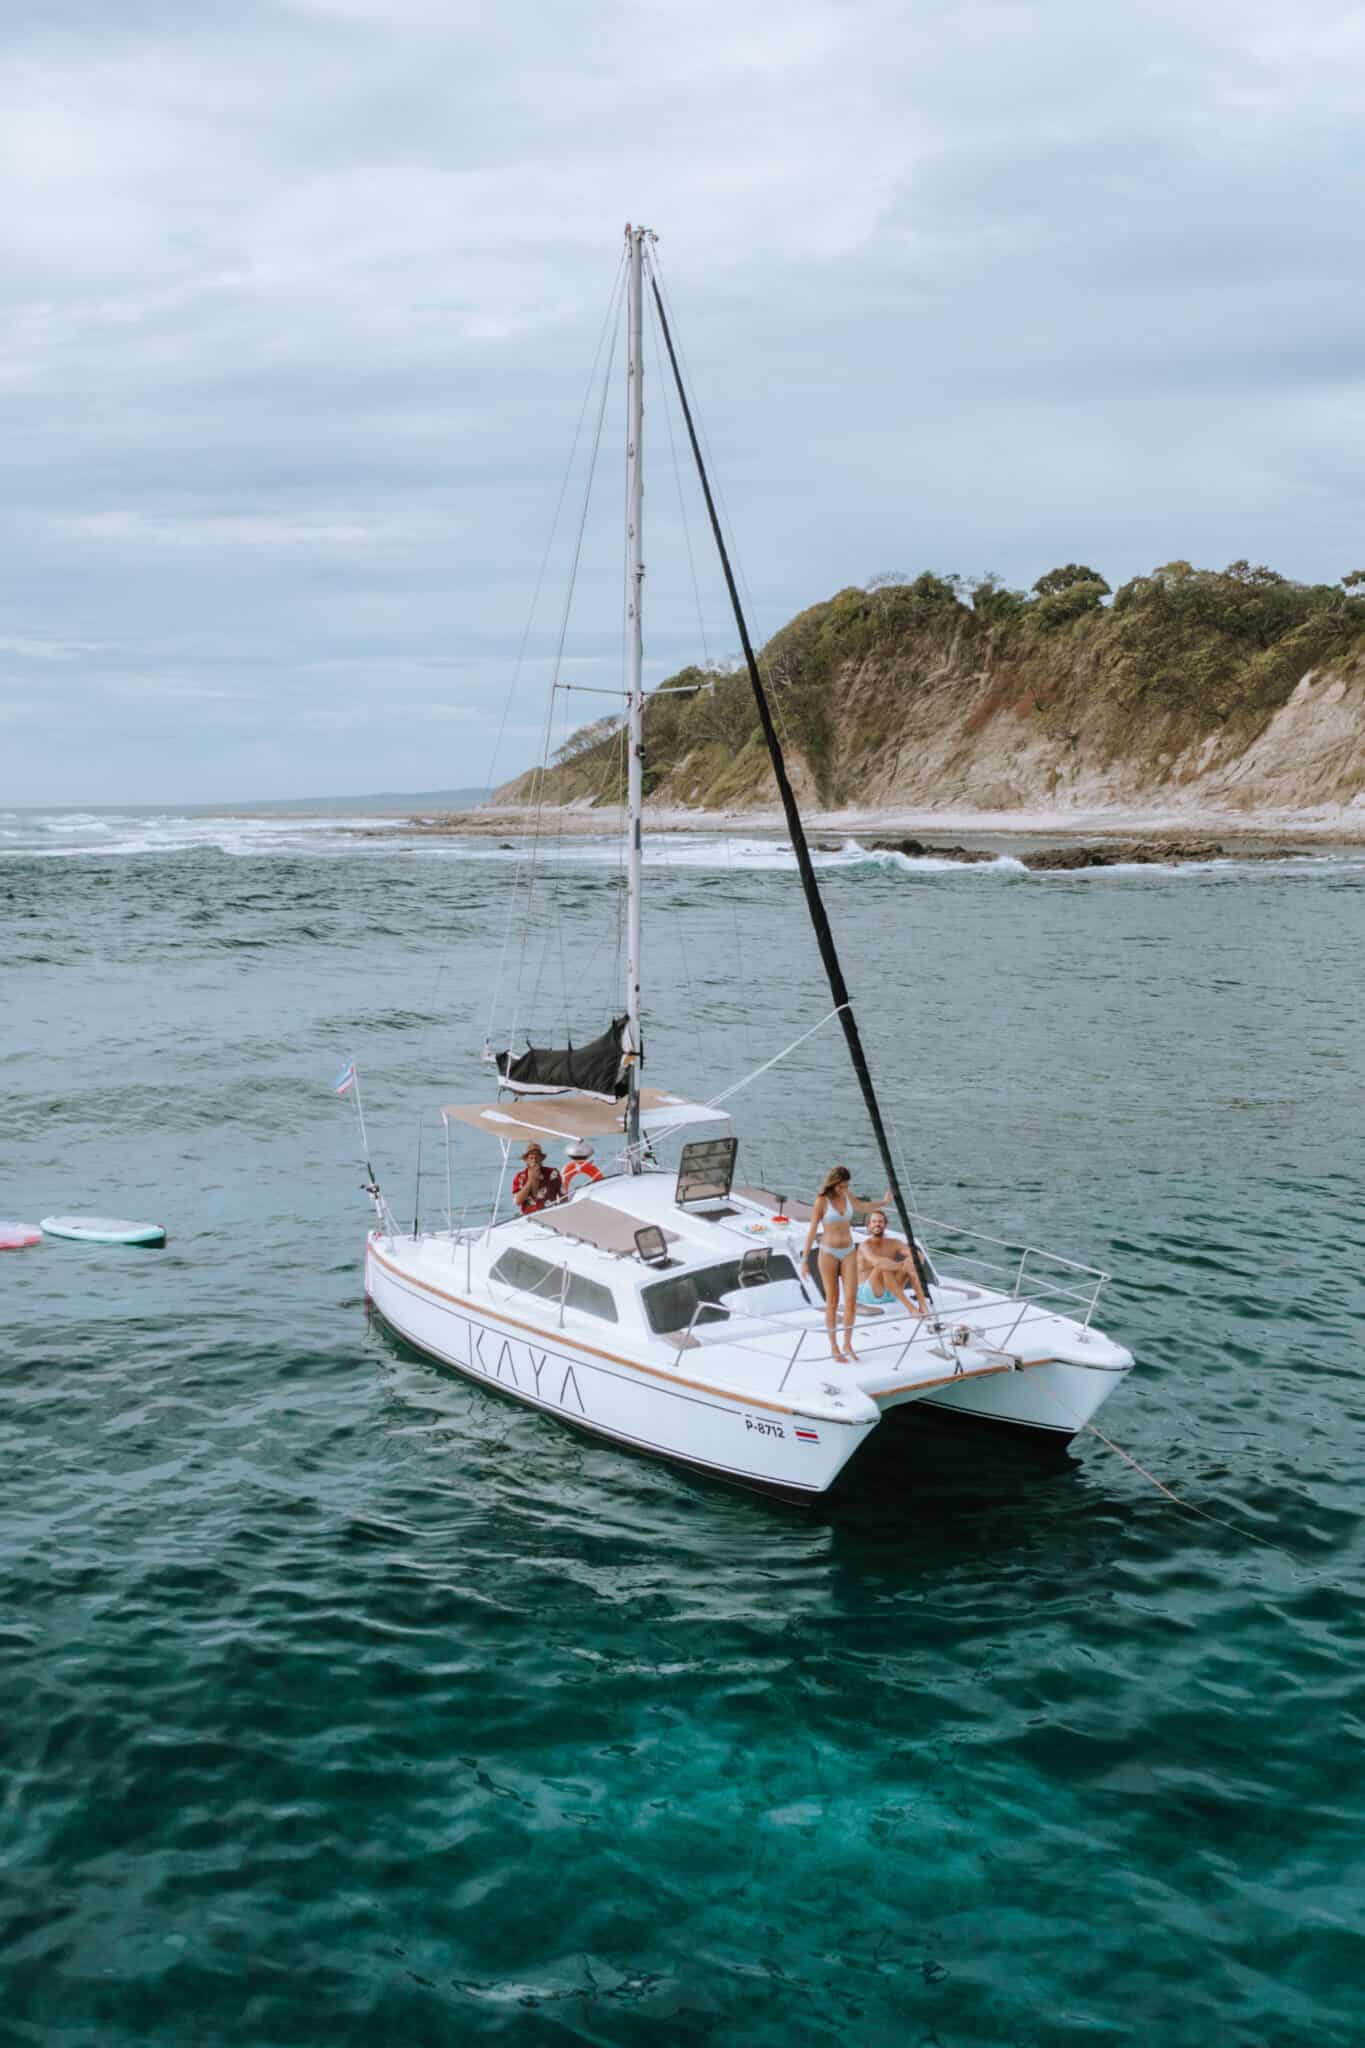 A white catamaran with people on board sails in the ocean, ready to work with us.